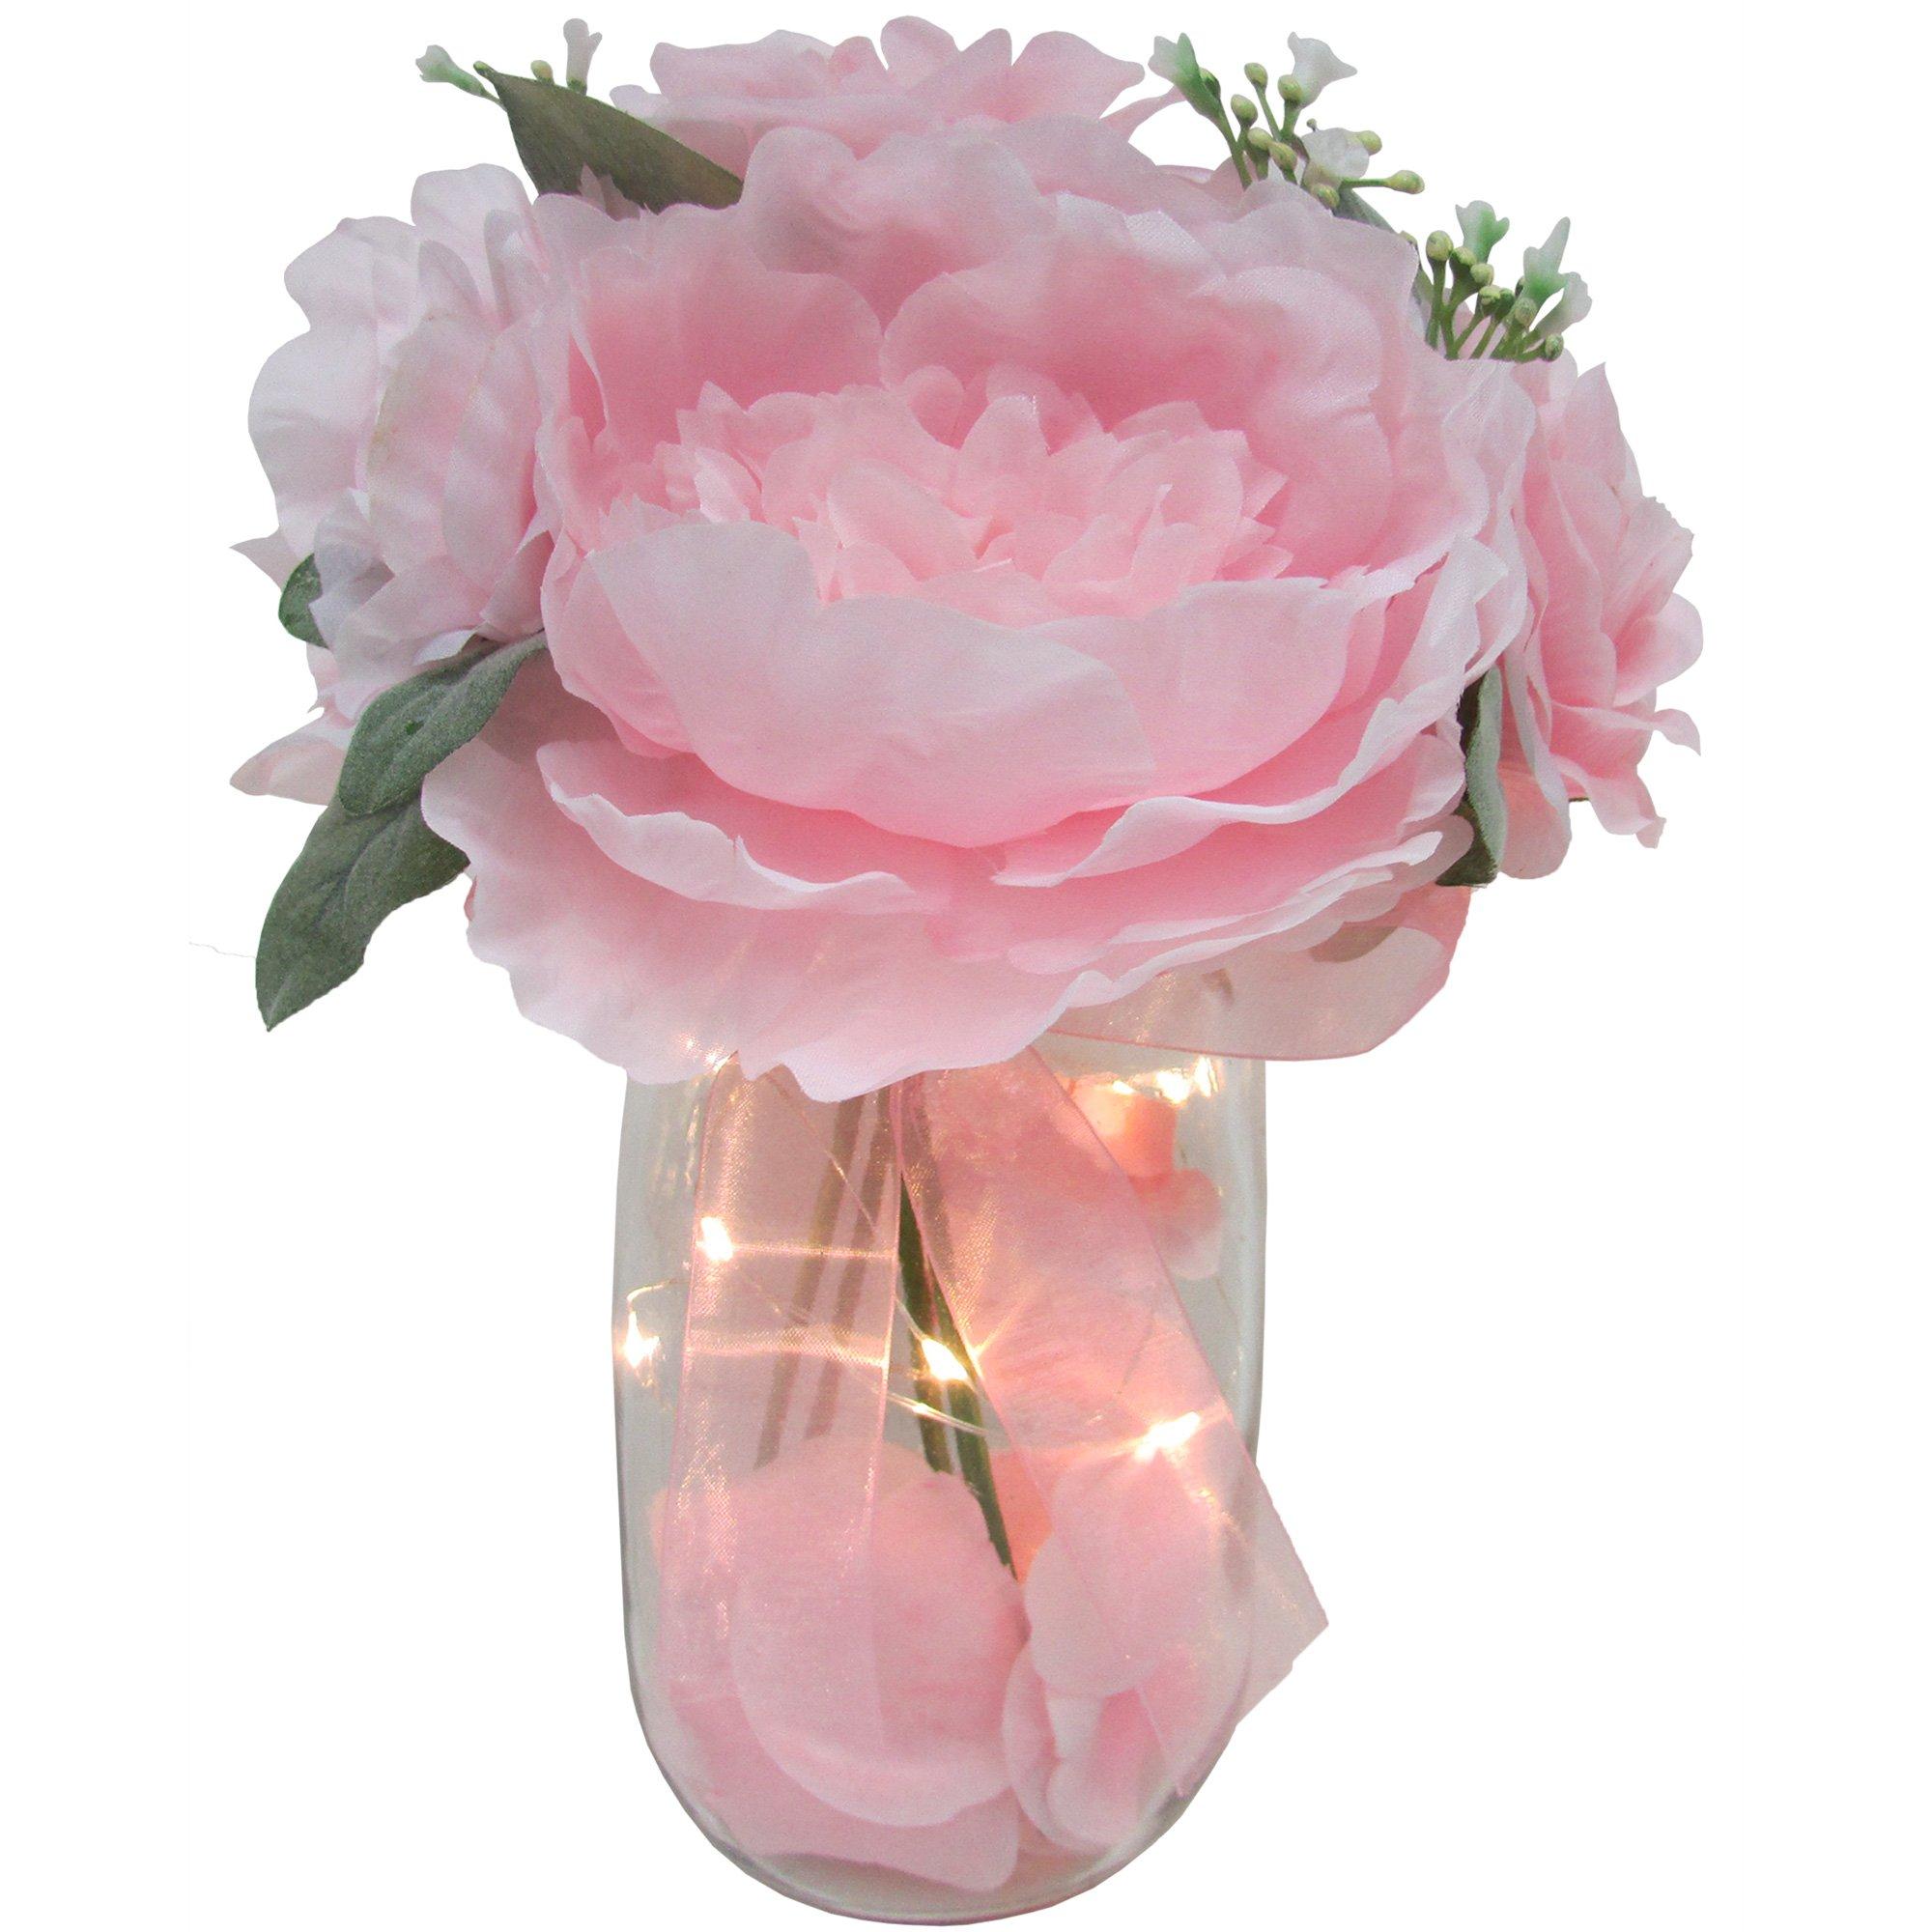 Fabric Flower Bouquet in Glass Vase with Fairy Lights